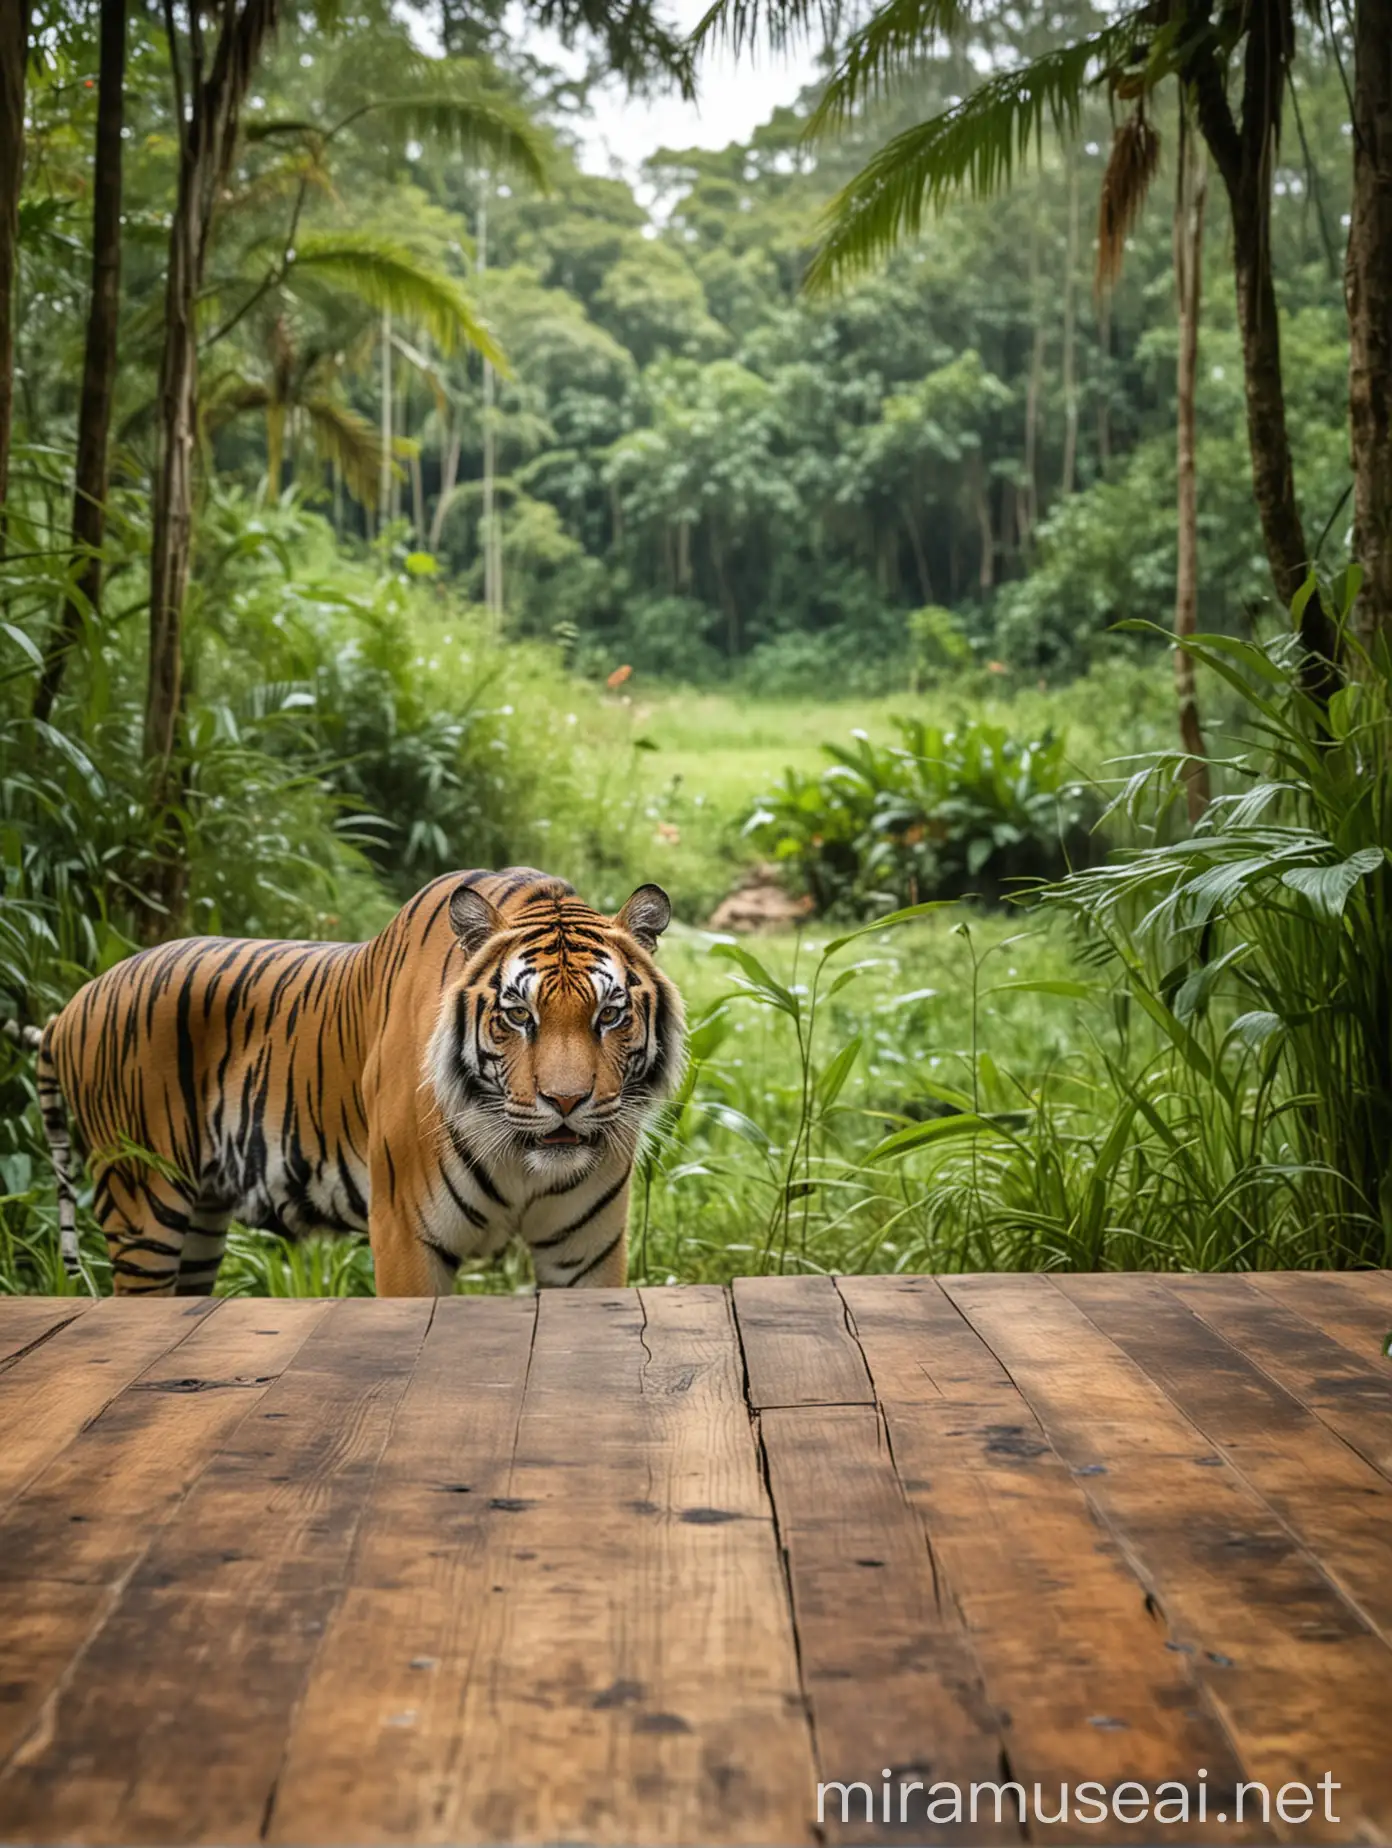 Table in Tropical Rainforest with Blurred Tiger Background